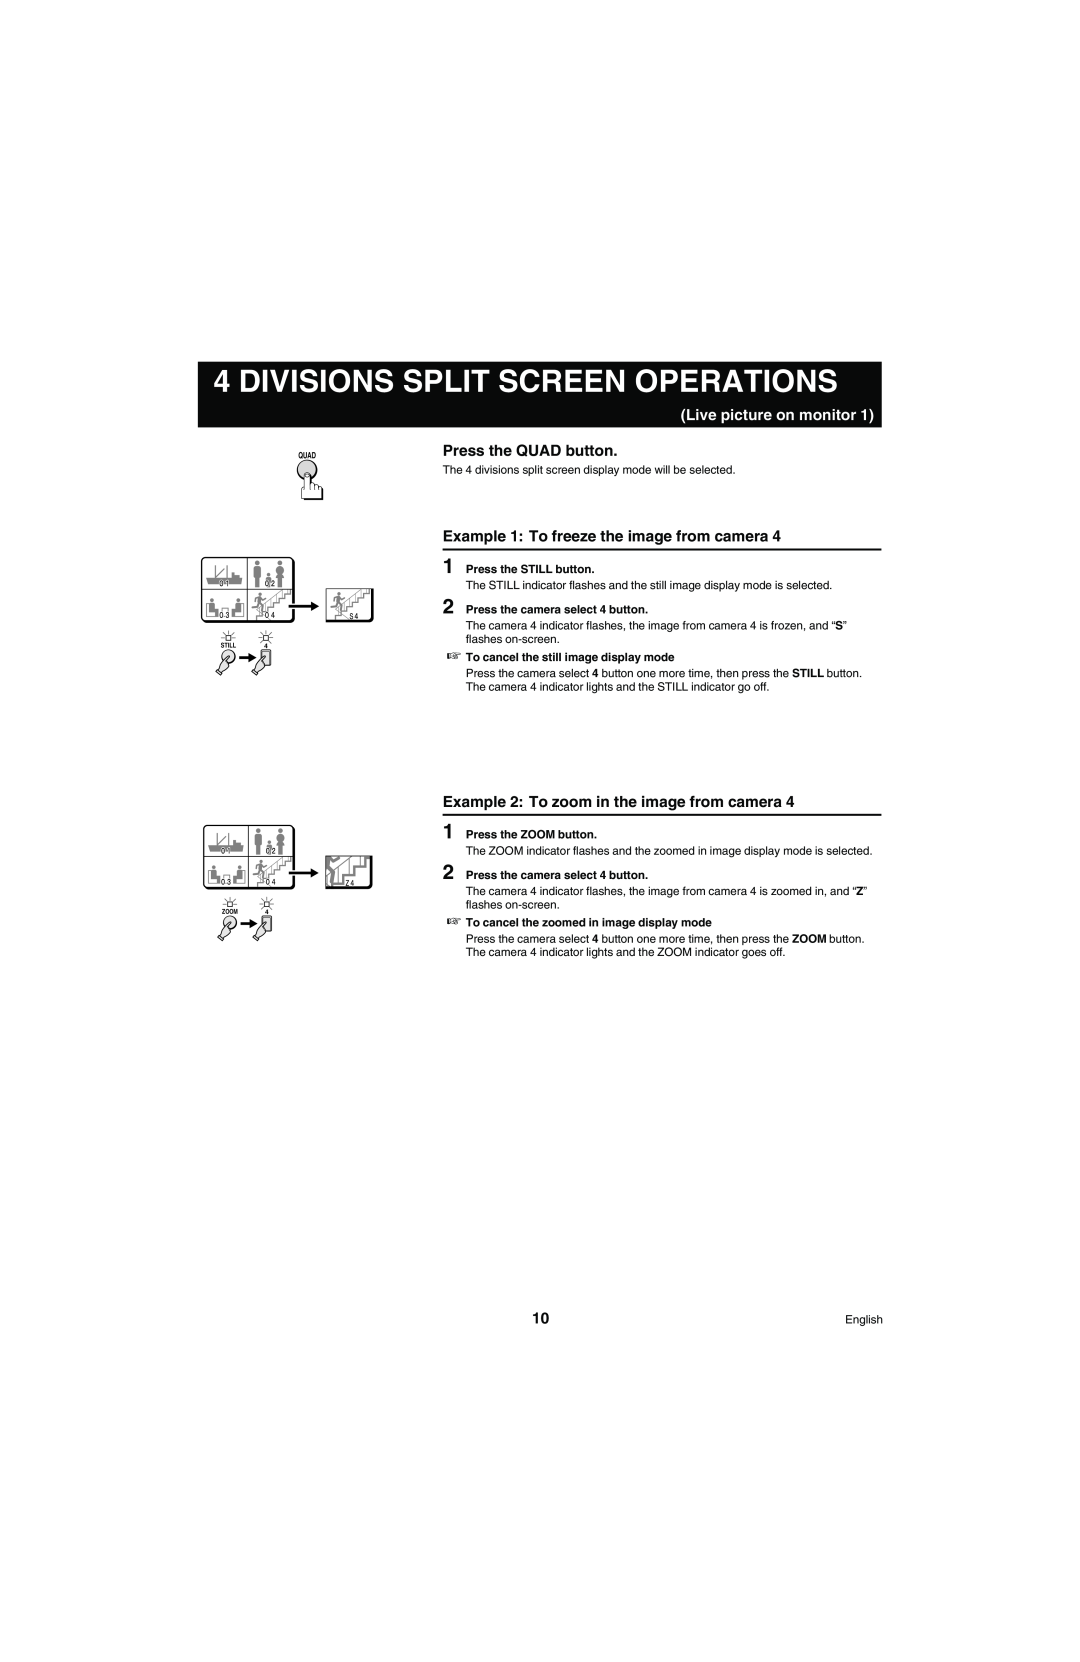 Sanyo MPX-MD4 instruction manual Divisions Split Screen Operations, Live picture on monitor, Press the QUAD button 